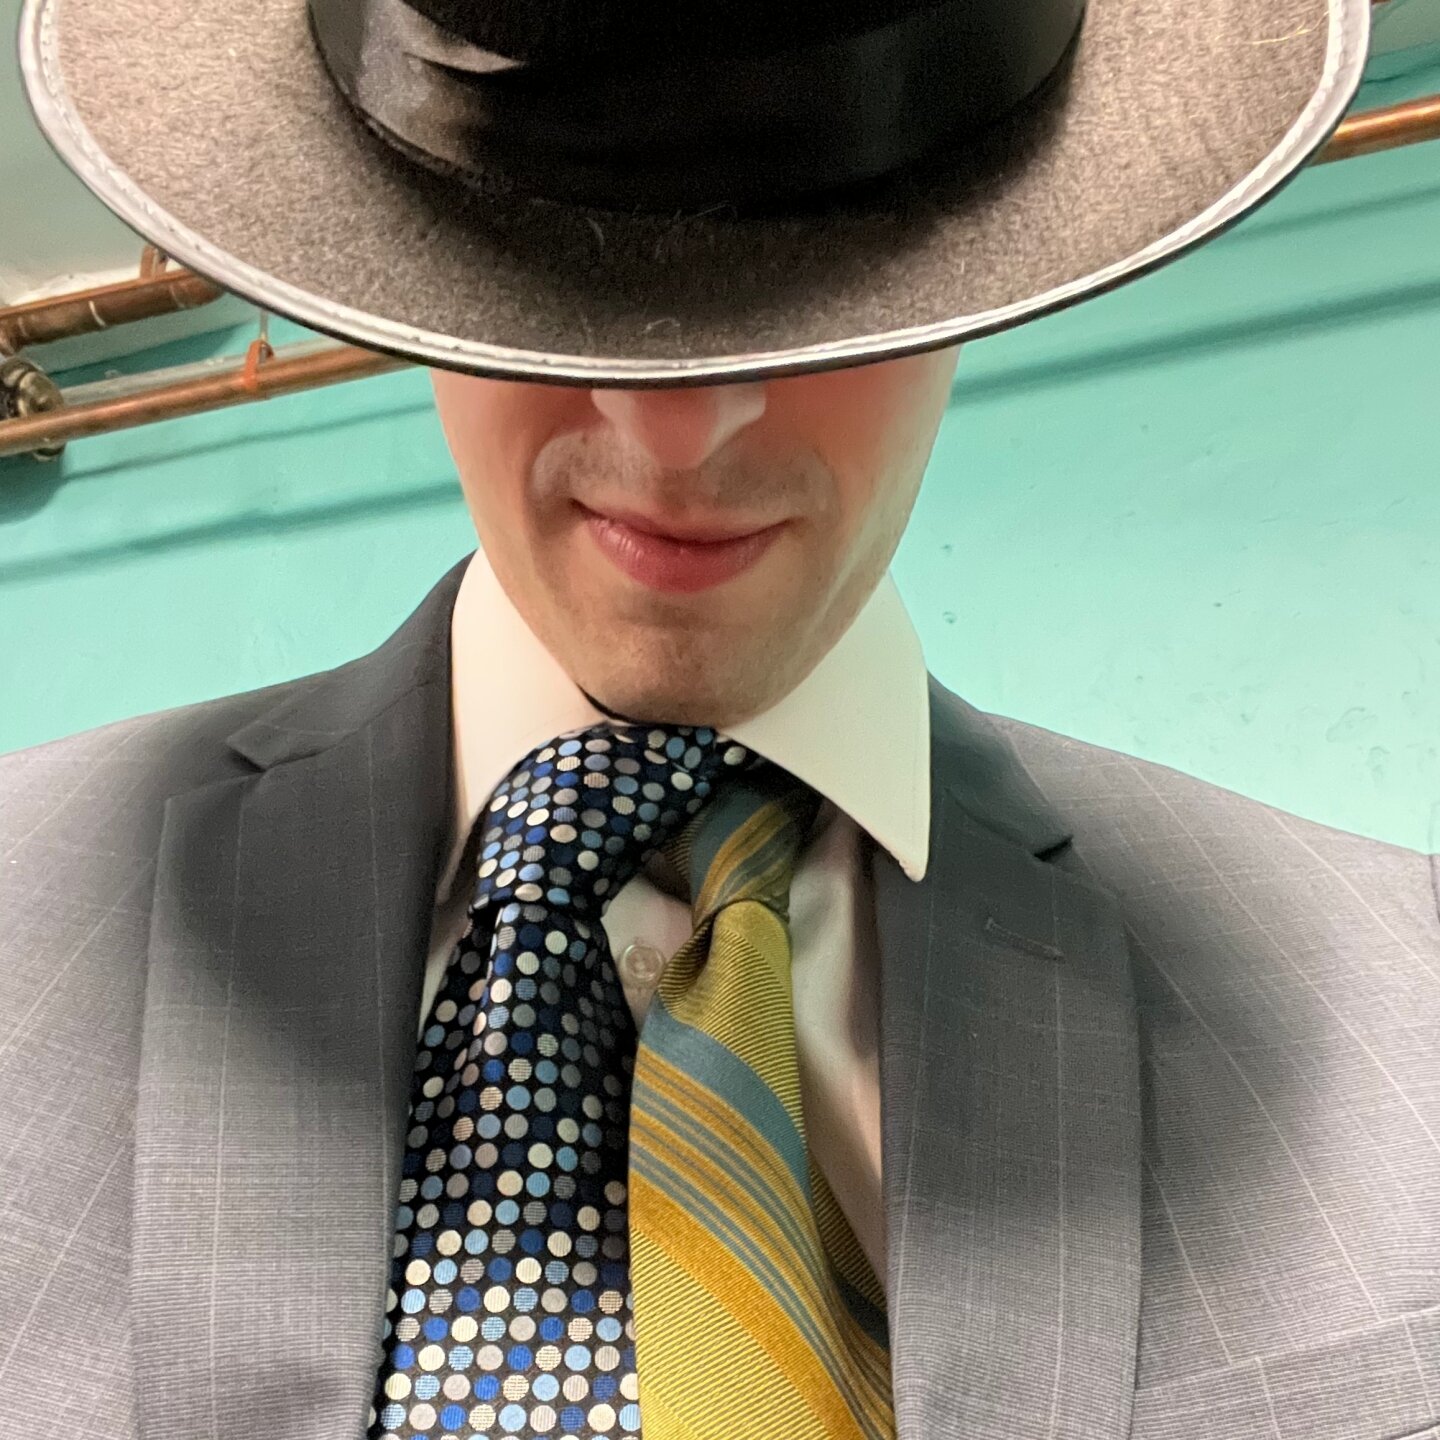 Why am I wearing two ties? Come see Mock Theatre at The Annoyance to find out!

Can't wait to make my Chicago Theater debut next Thursday, March 10th. Find out more at the Facebook event below or the link in my bio

https://www.facebook.com/Mock-Thea